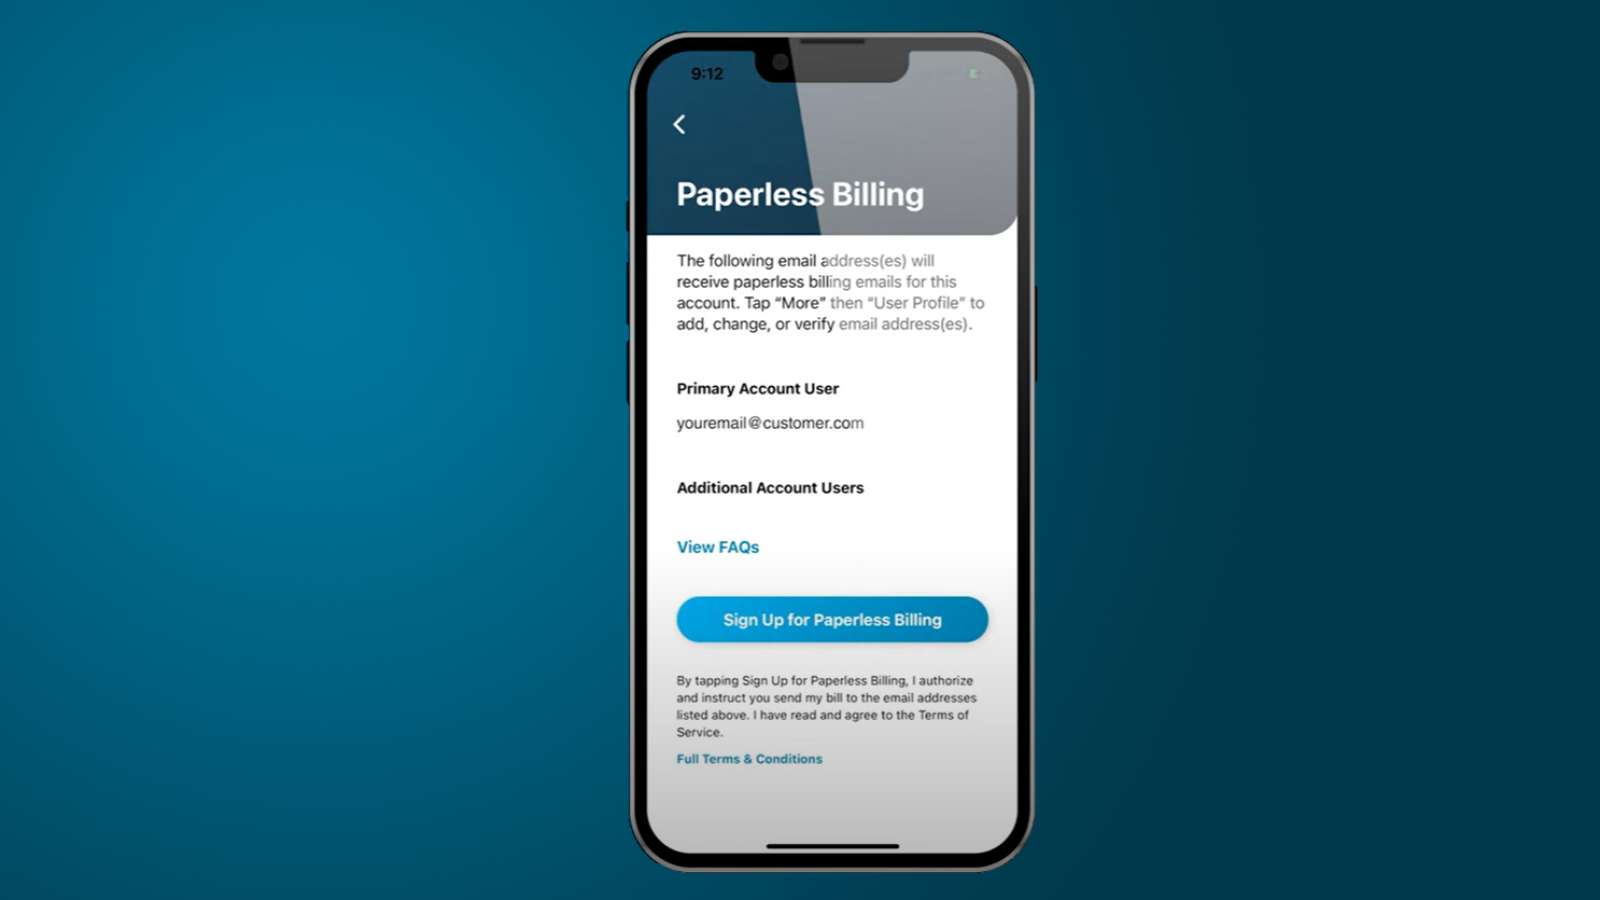 paperless billing signup screen on smartphone